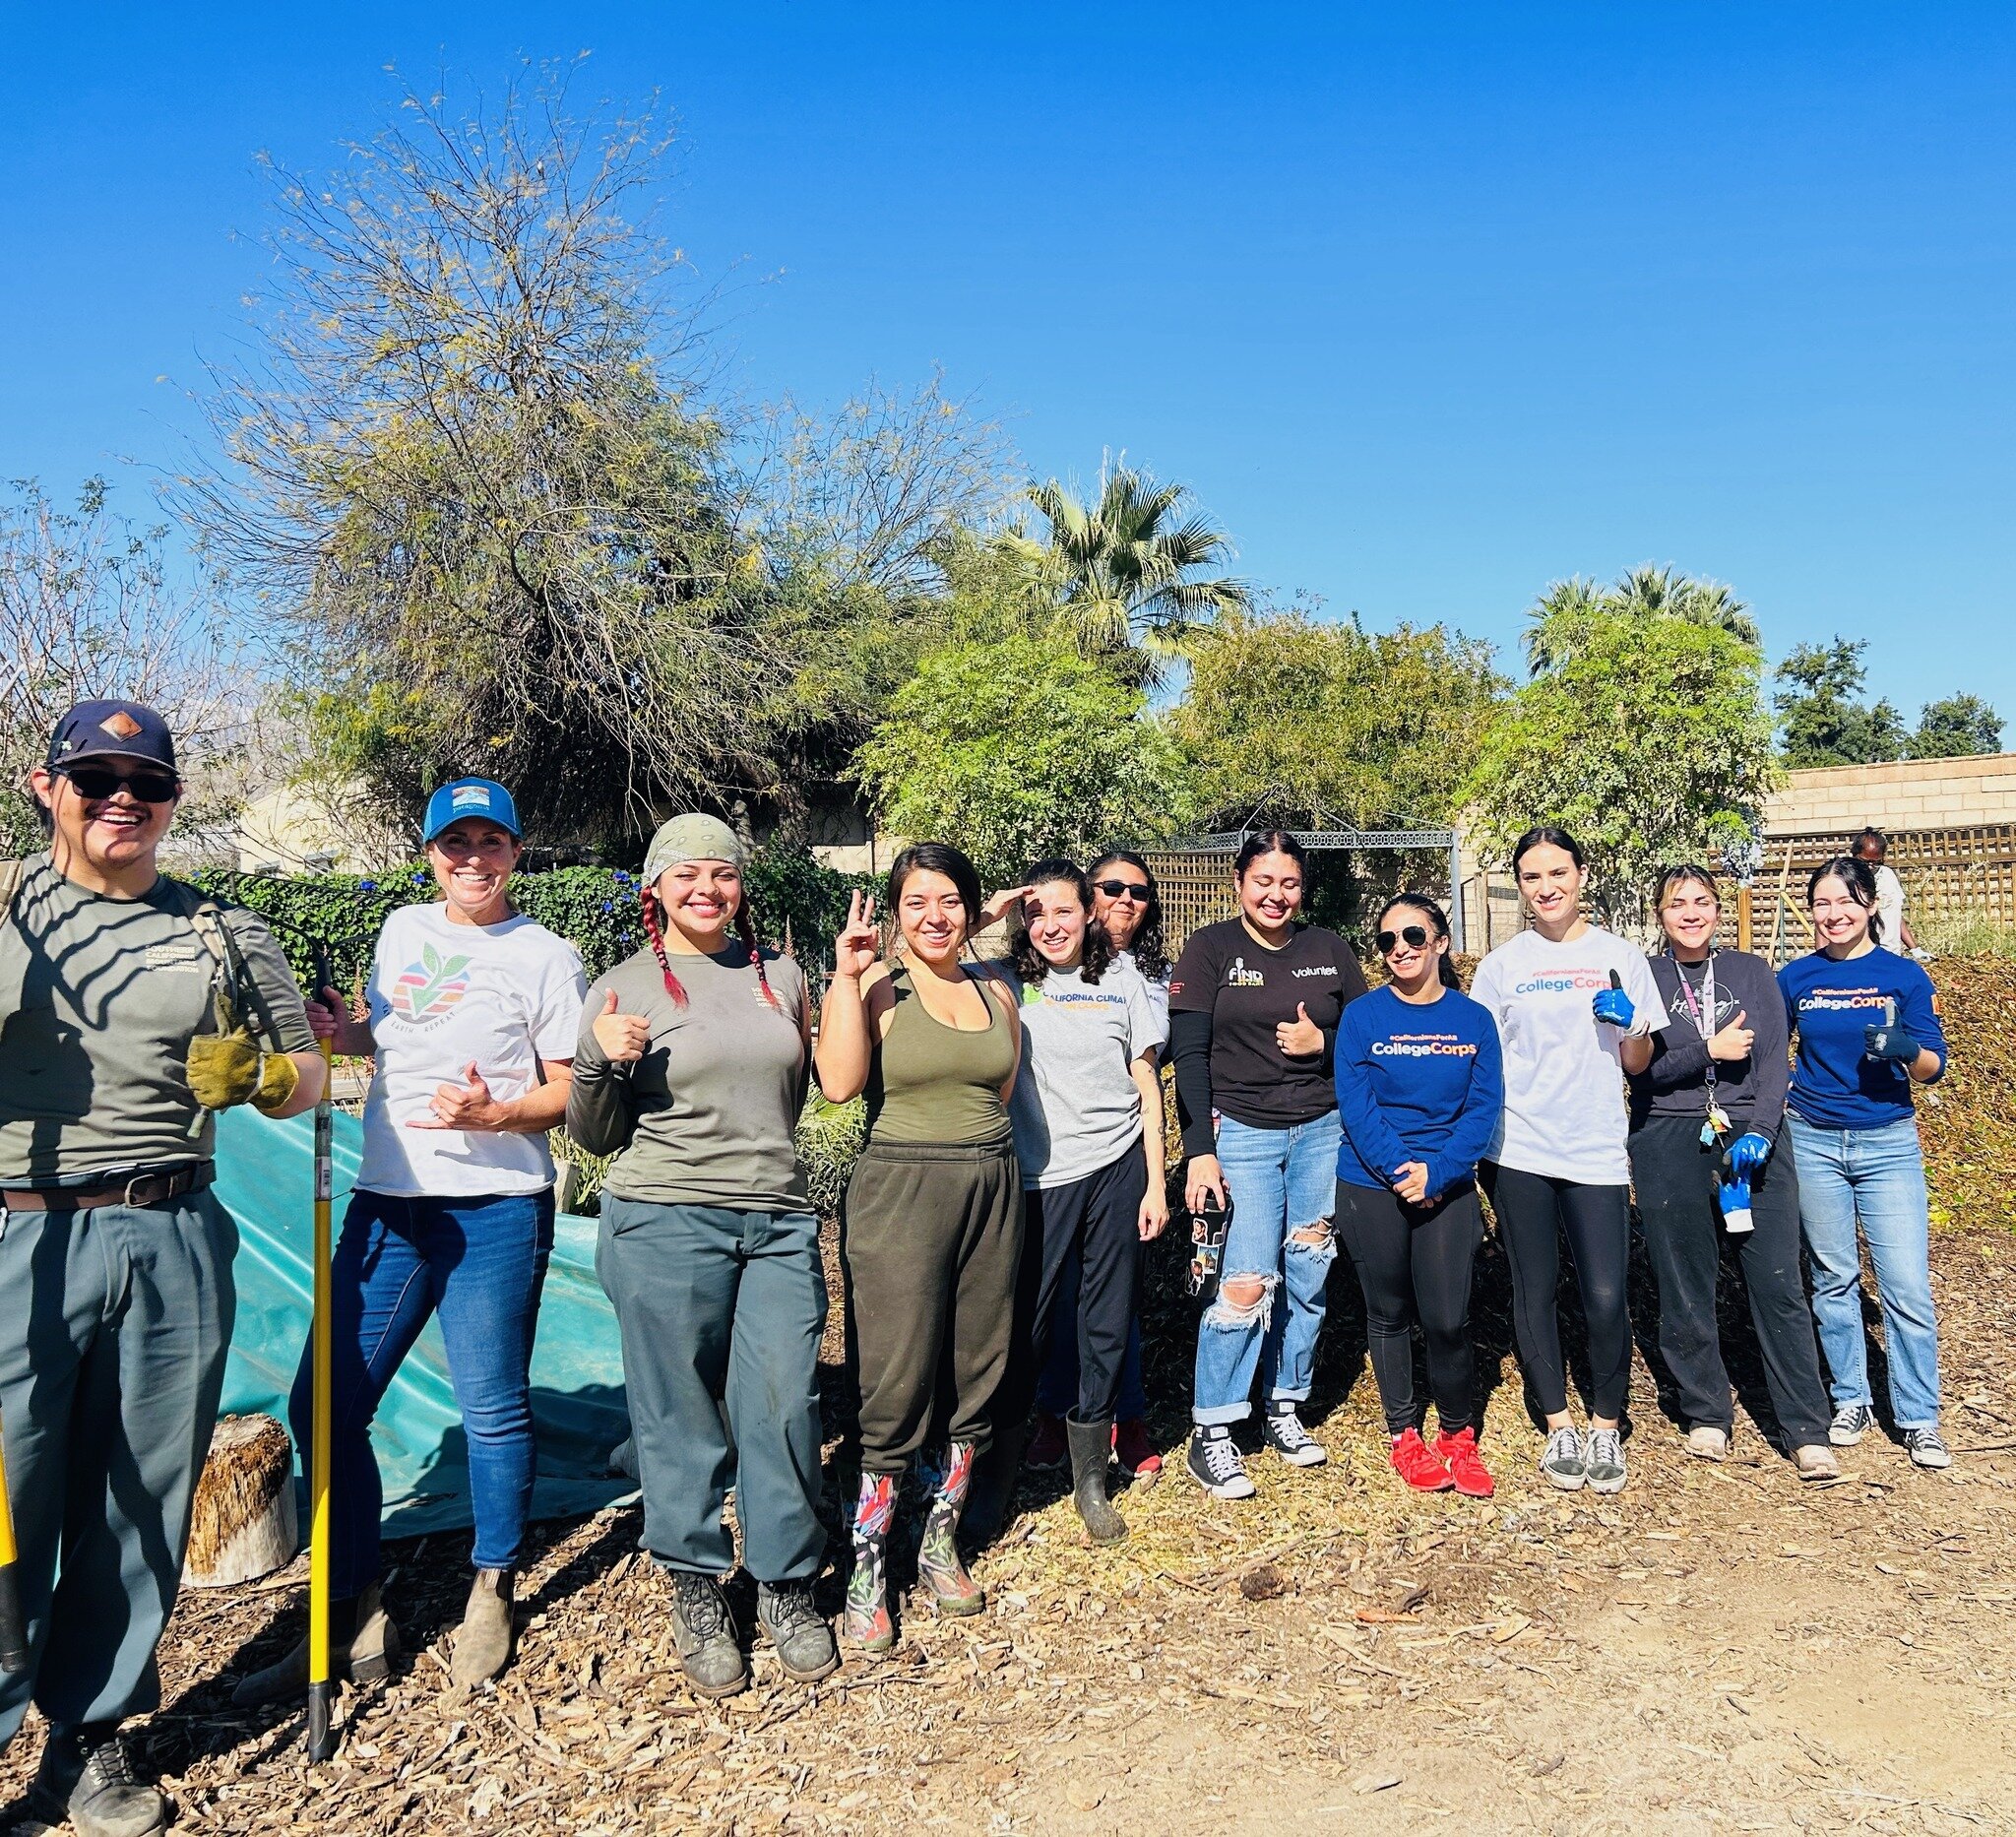 College Corps volunteers at @collegeofthedesert are composting the leftover inedible food from the college food bank. Any food not fit for consumption is being composted at their own site. We are thrilled that College Corps volunteers are training wi